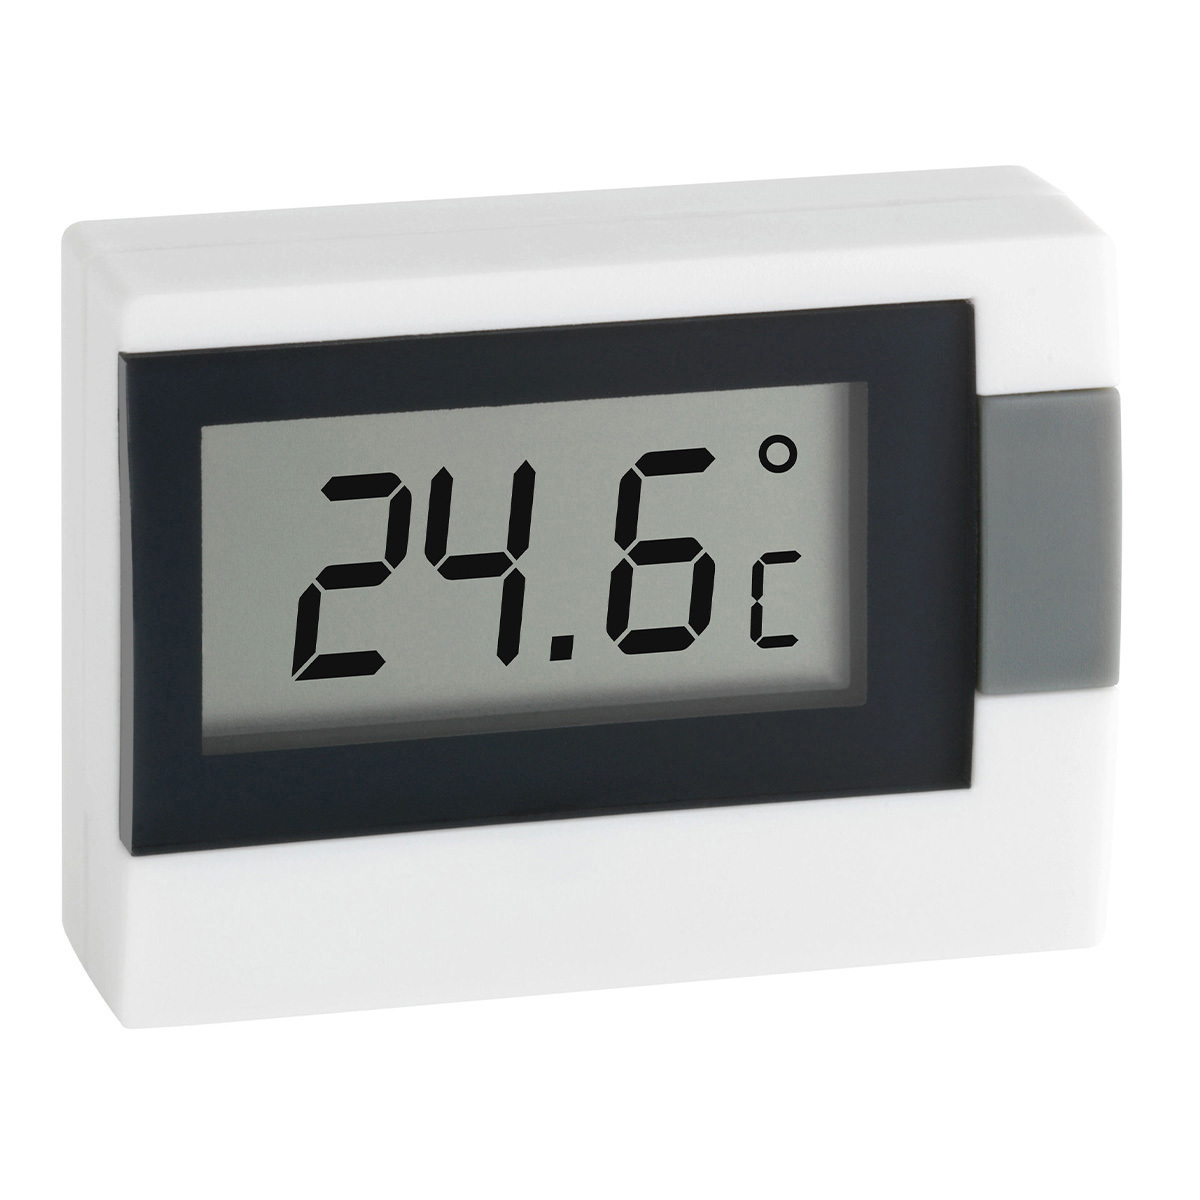 30-2017-02-digitales-thermometer-1200x1200px.jpg